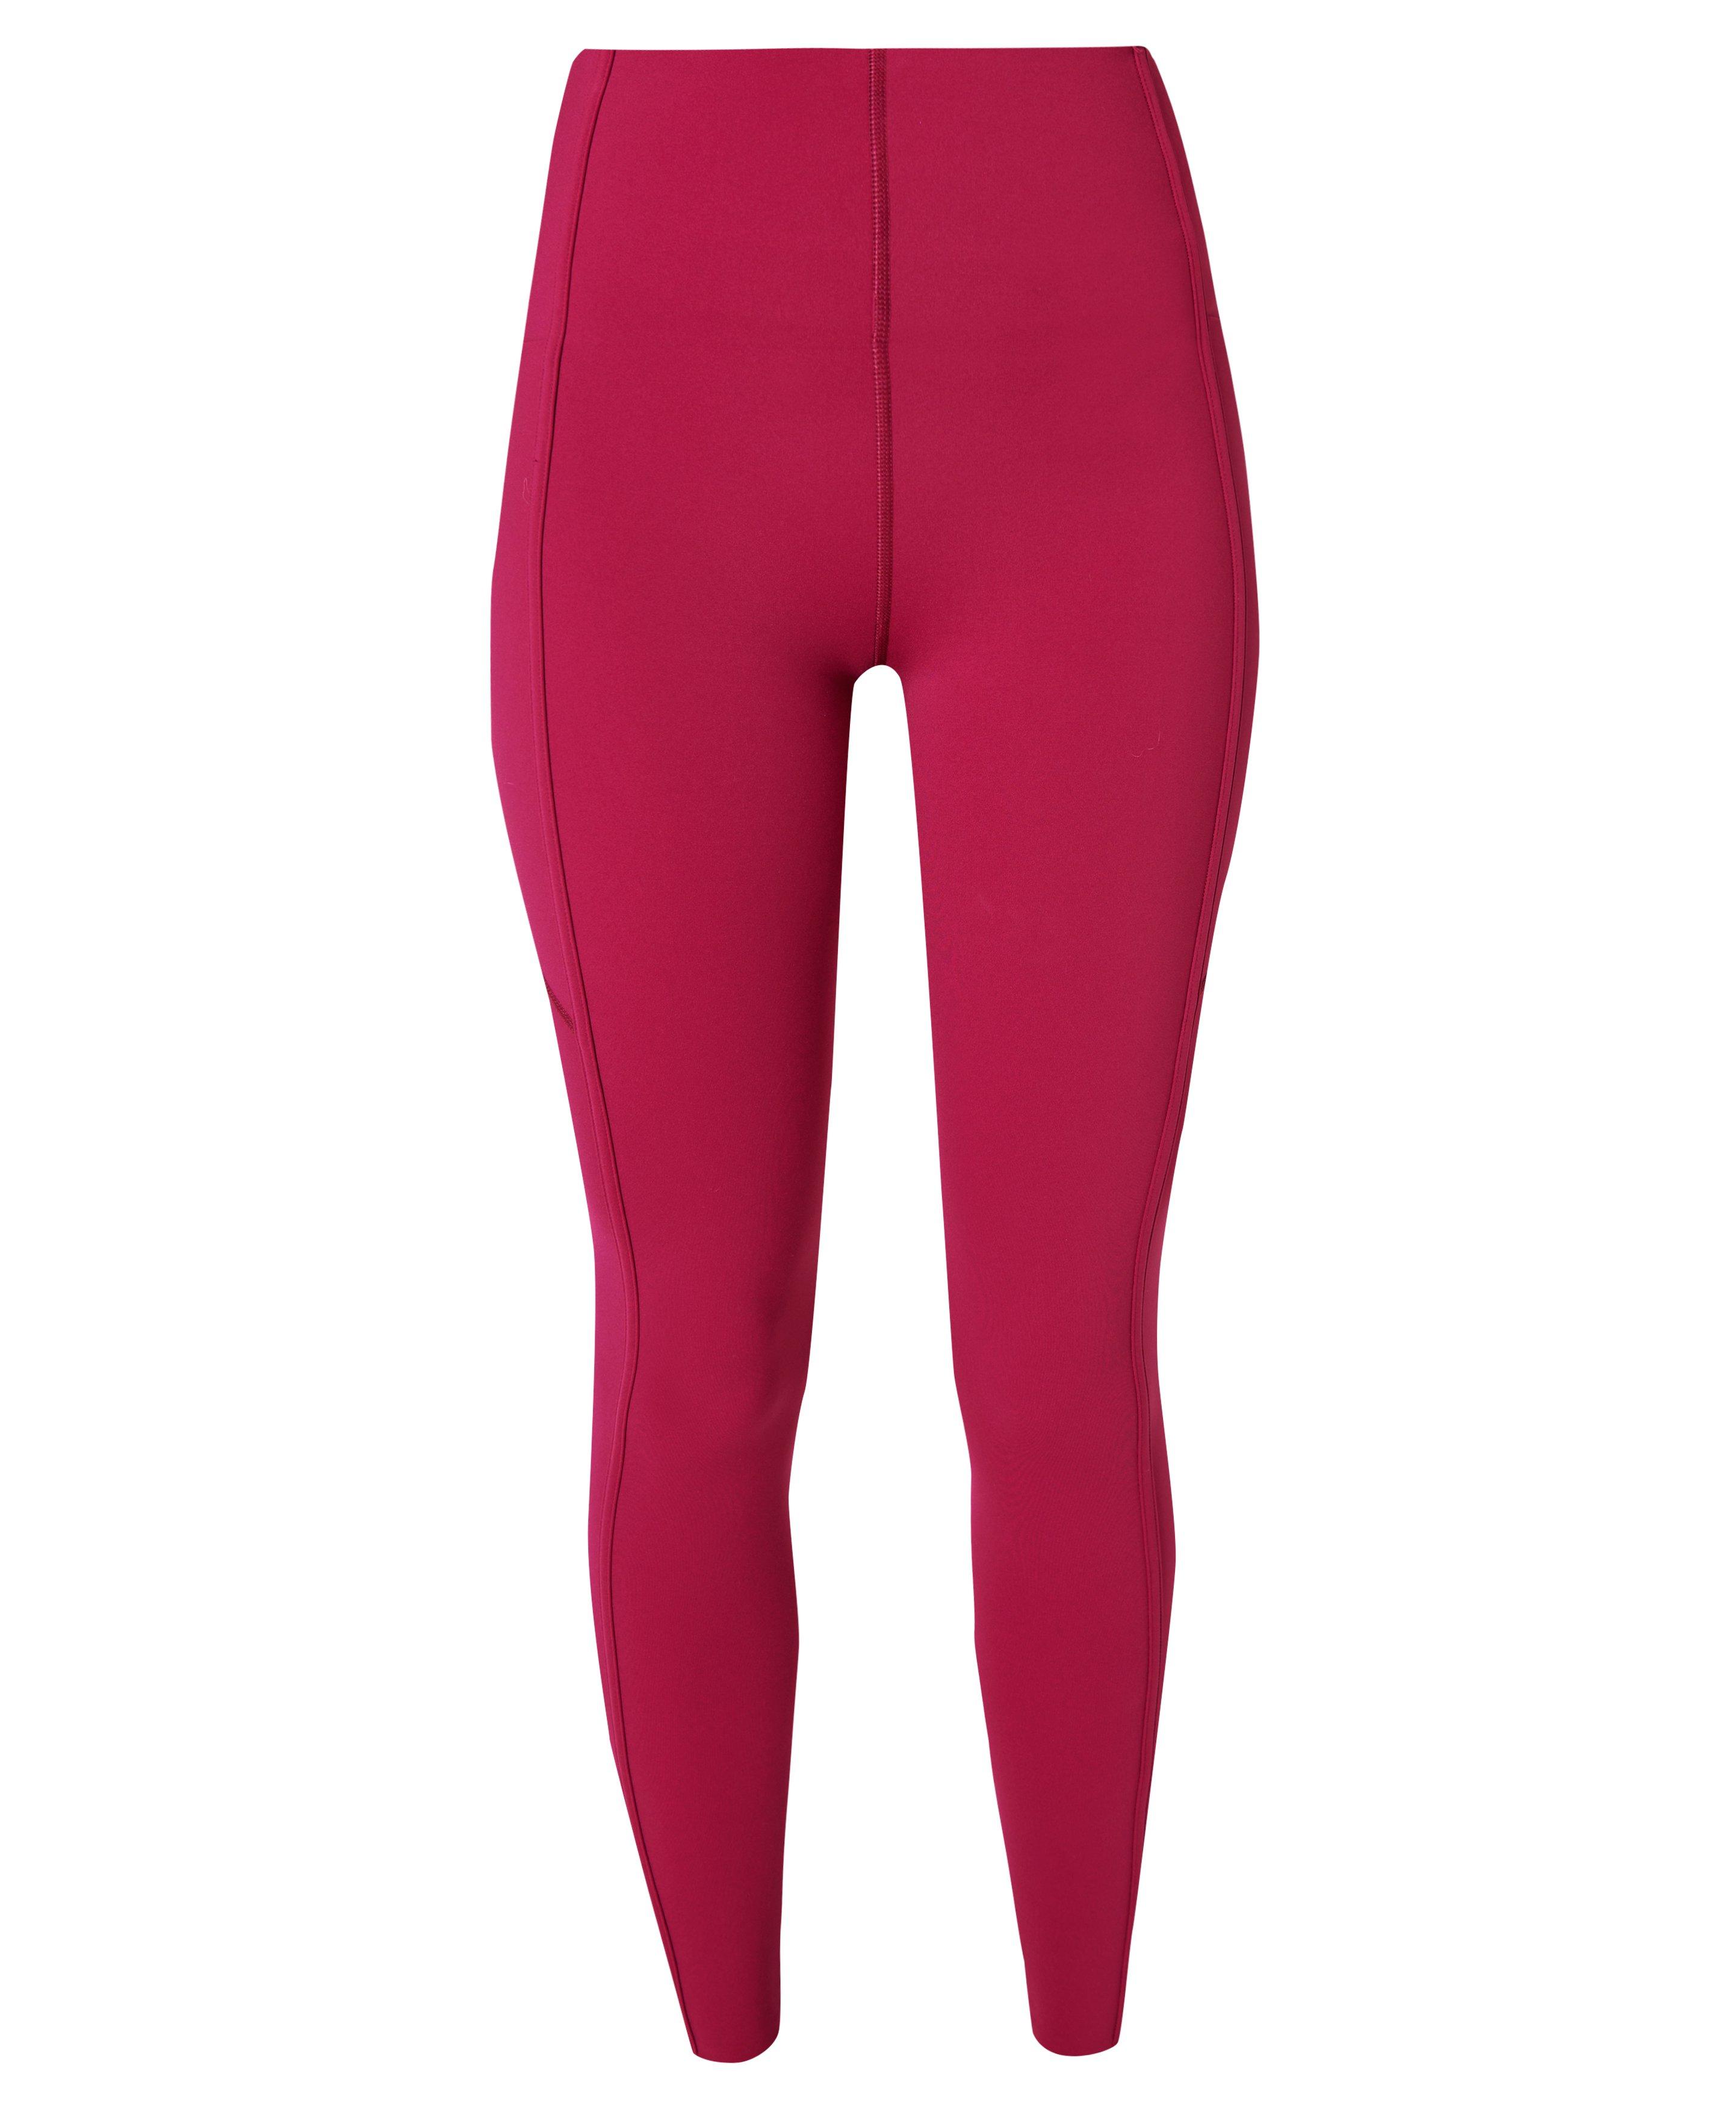 Gym Leggings - High Waisted - Spicy Red